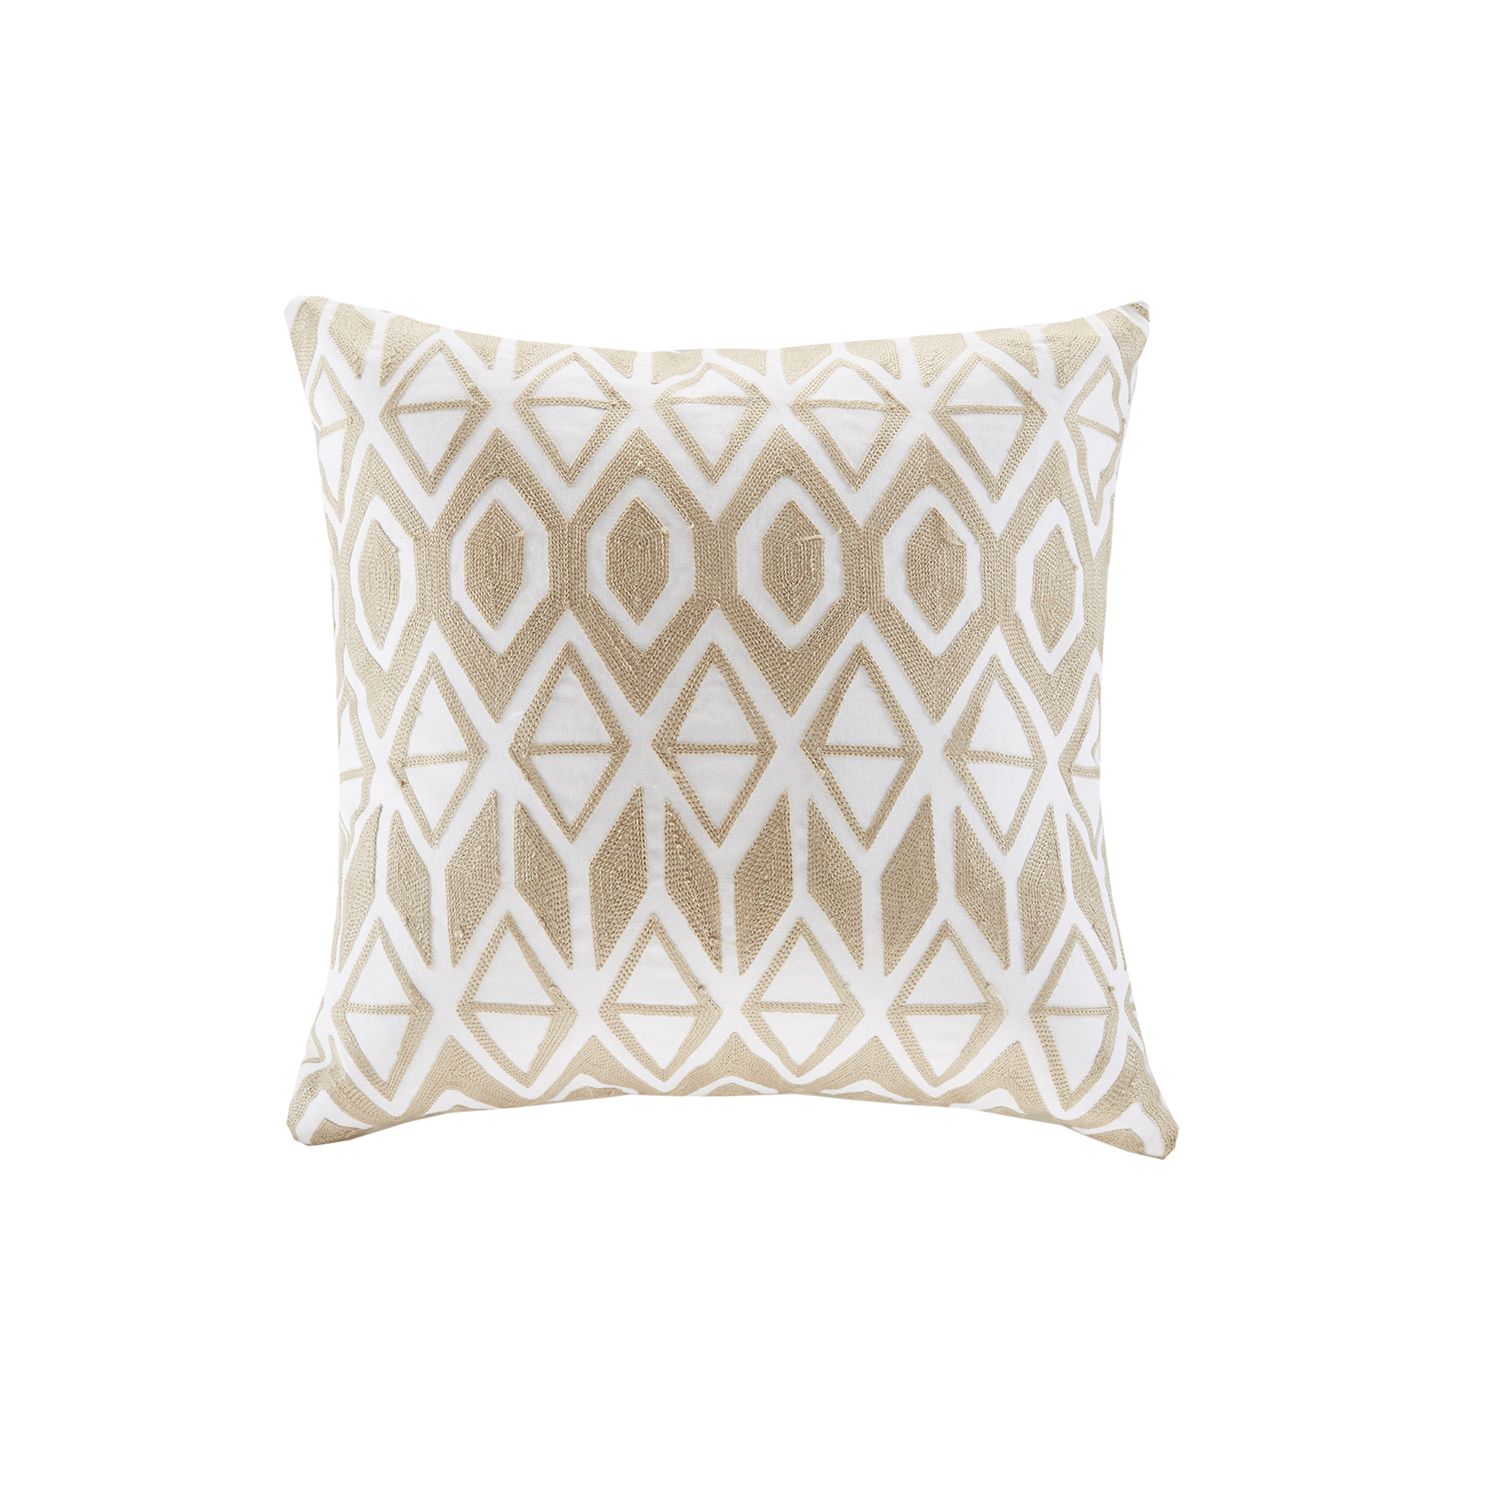 Image for Harbor House Anslee Embroidered Square Throw Pillow at Kohl's.